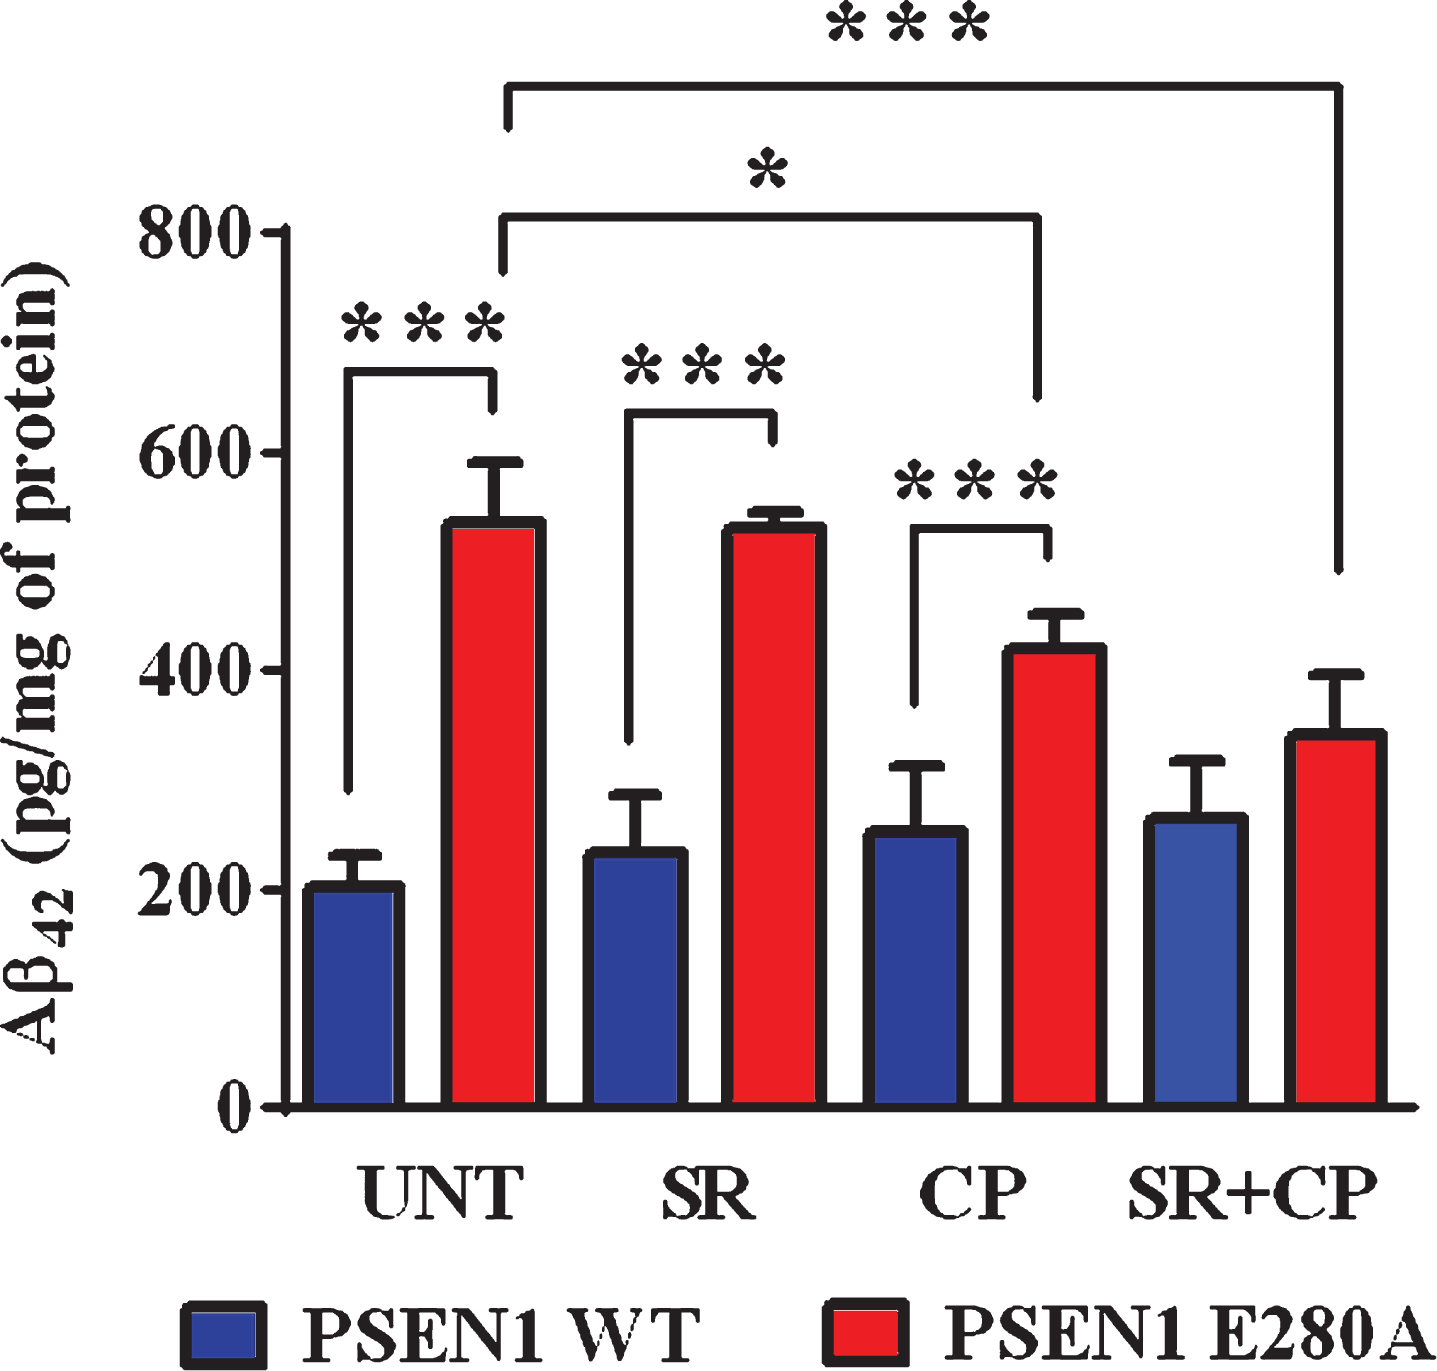 CP55940 reduced the levels of extracellular Aβ42 peptide in PSEN1 E280A ChLNs by a CB1R-independent mechanism. After 7 days of transdifferentiation, WT PSEN1 and PSEN1 E280A ChLNs were left untreated or treated with SR, CP, or SR + CP in RCm for 4 days. ELISA quantification of extracellular Aβ42 peptide in supernatants. Data are presented as means±SD. *p < 0.05; **p < 0.01; ***p < 0.001. The histograms and figures represent 1 out of 4 independent experiments.